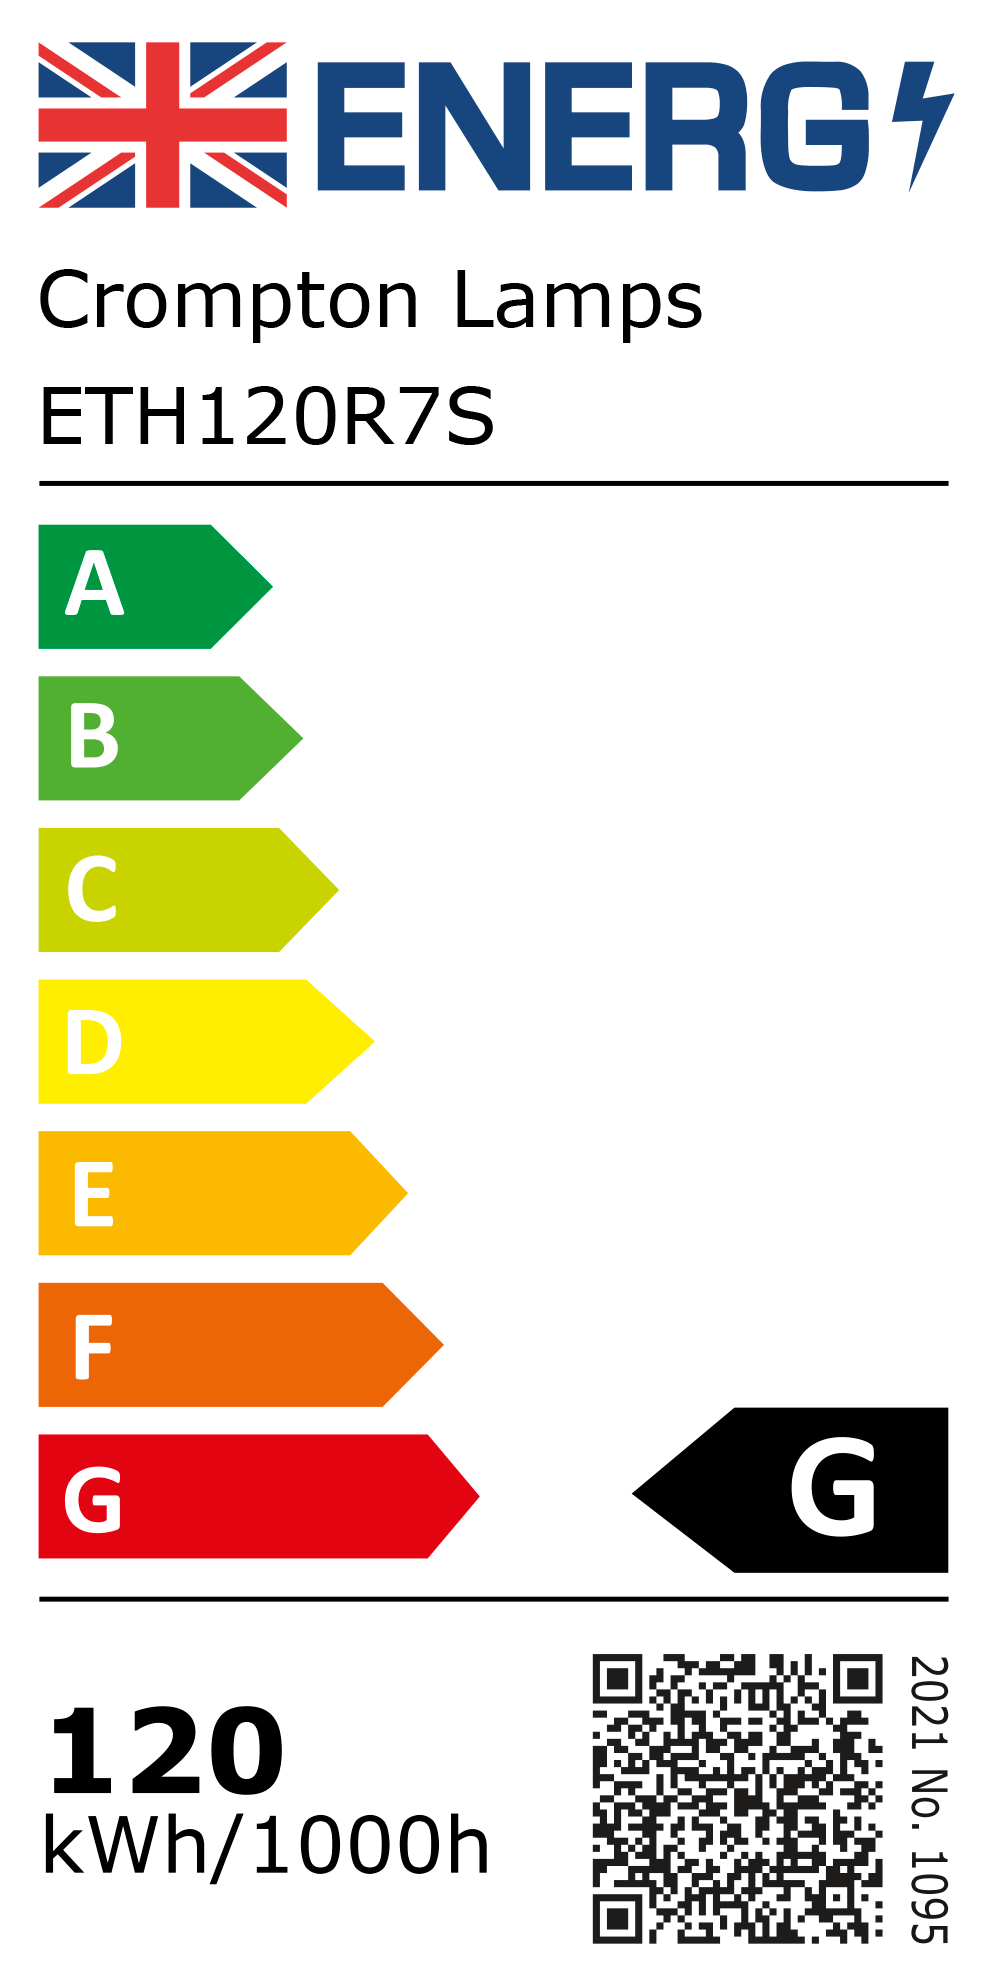 New 2021 Energy Rating Label: Stock Code ETH120R7S